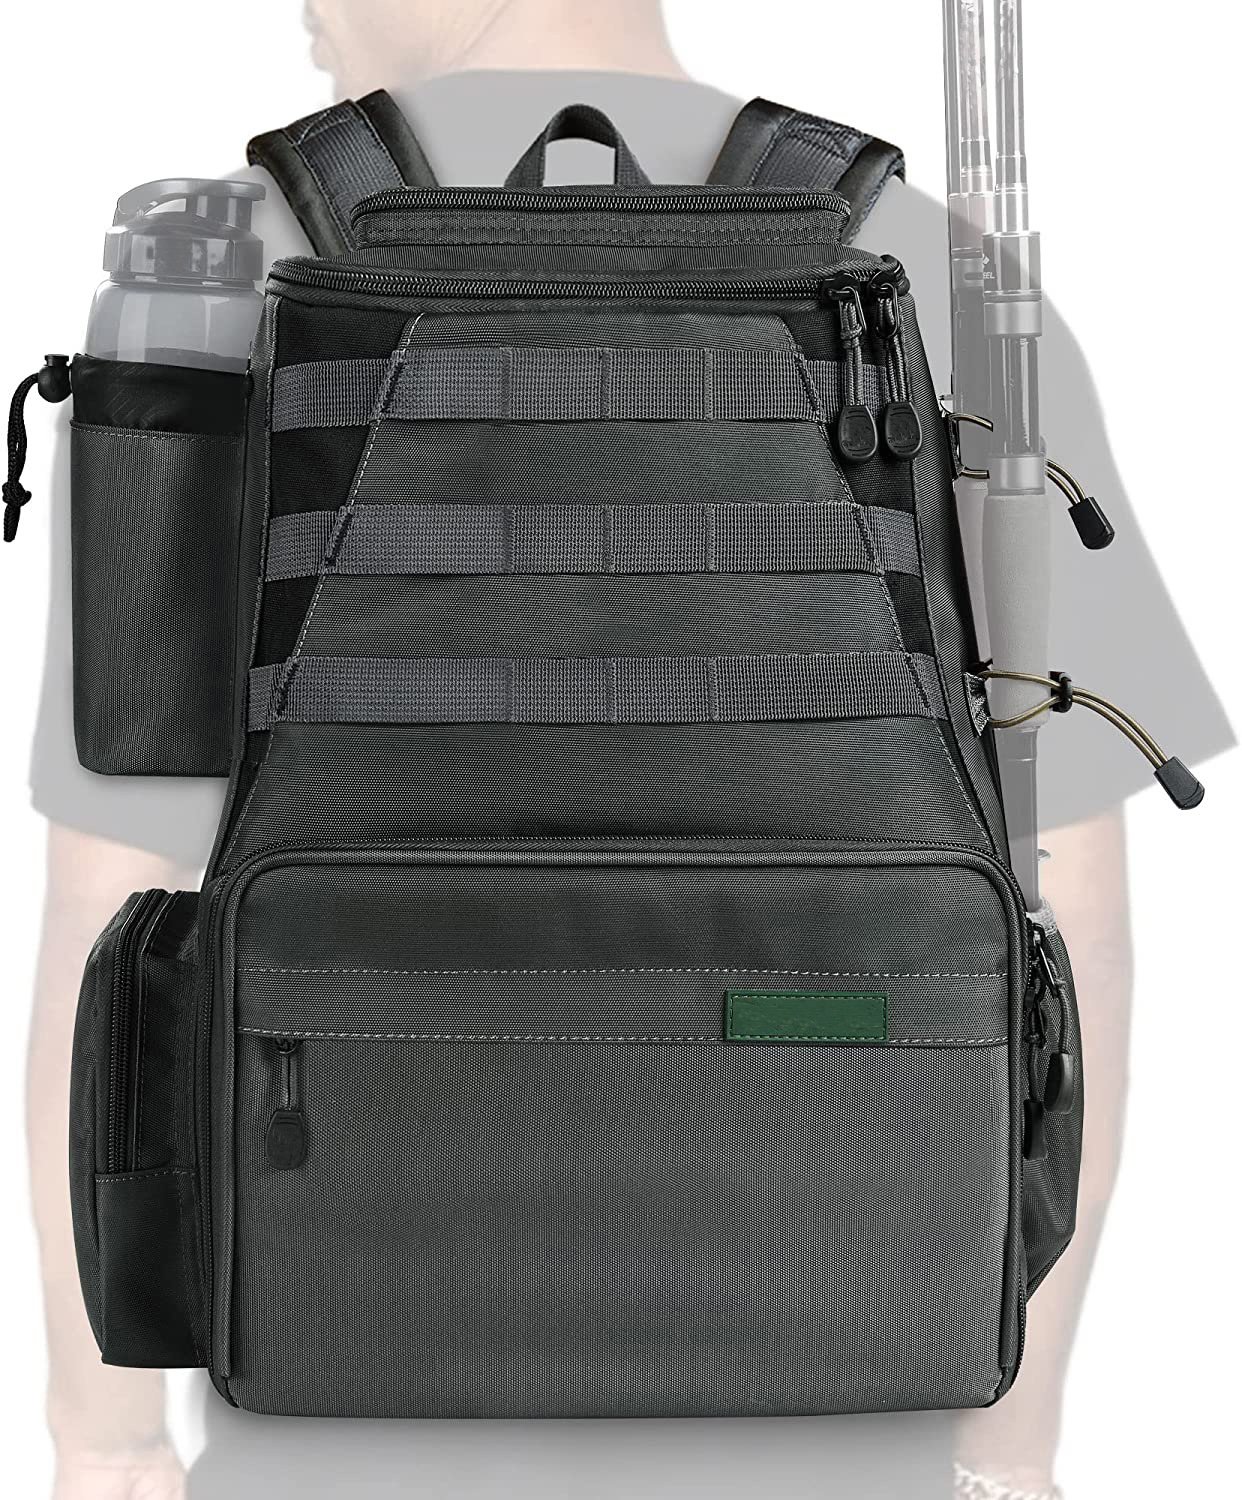 Fishing Tackle Backpack 2 Fishing Rod Holders Without 4 Tackle Boxes,Large Storage Backpack 